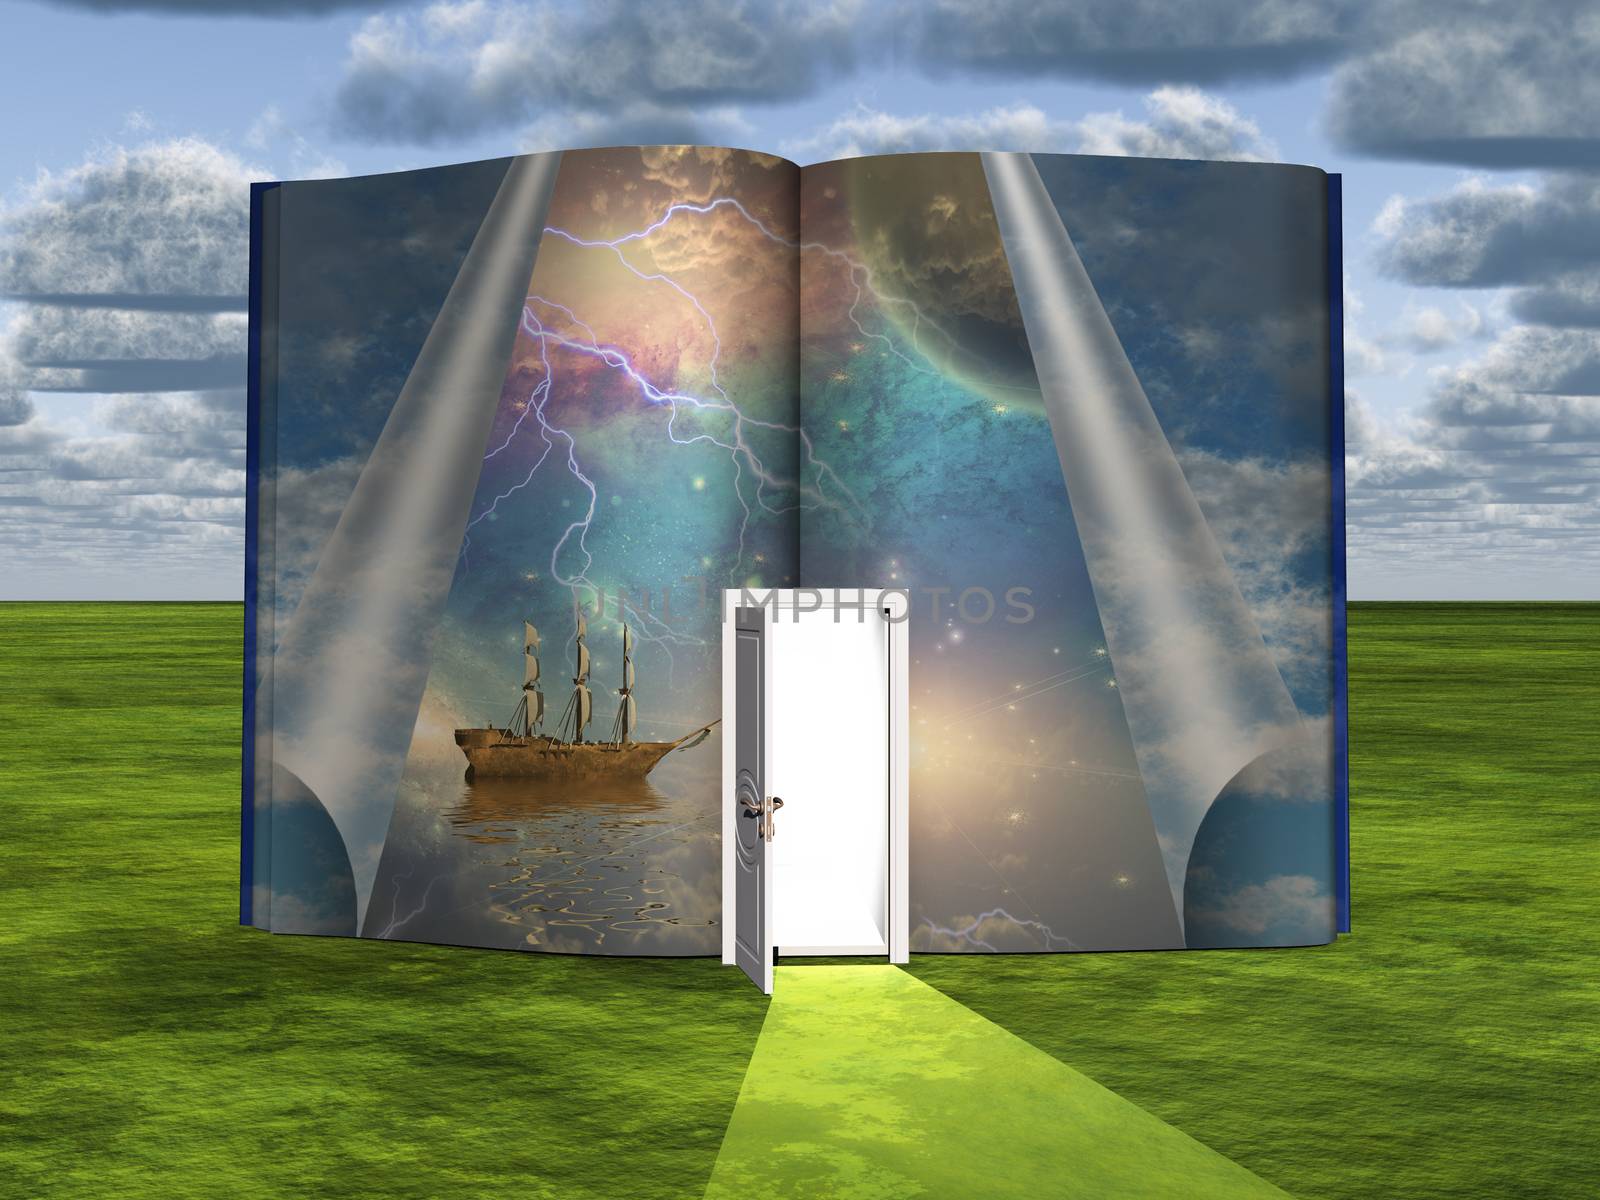 Book with science fiction scene and open doorway of light